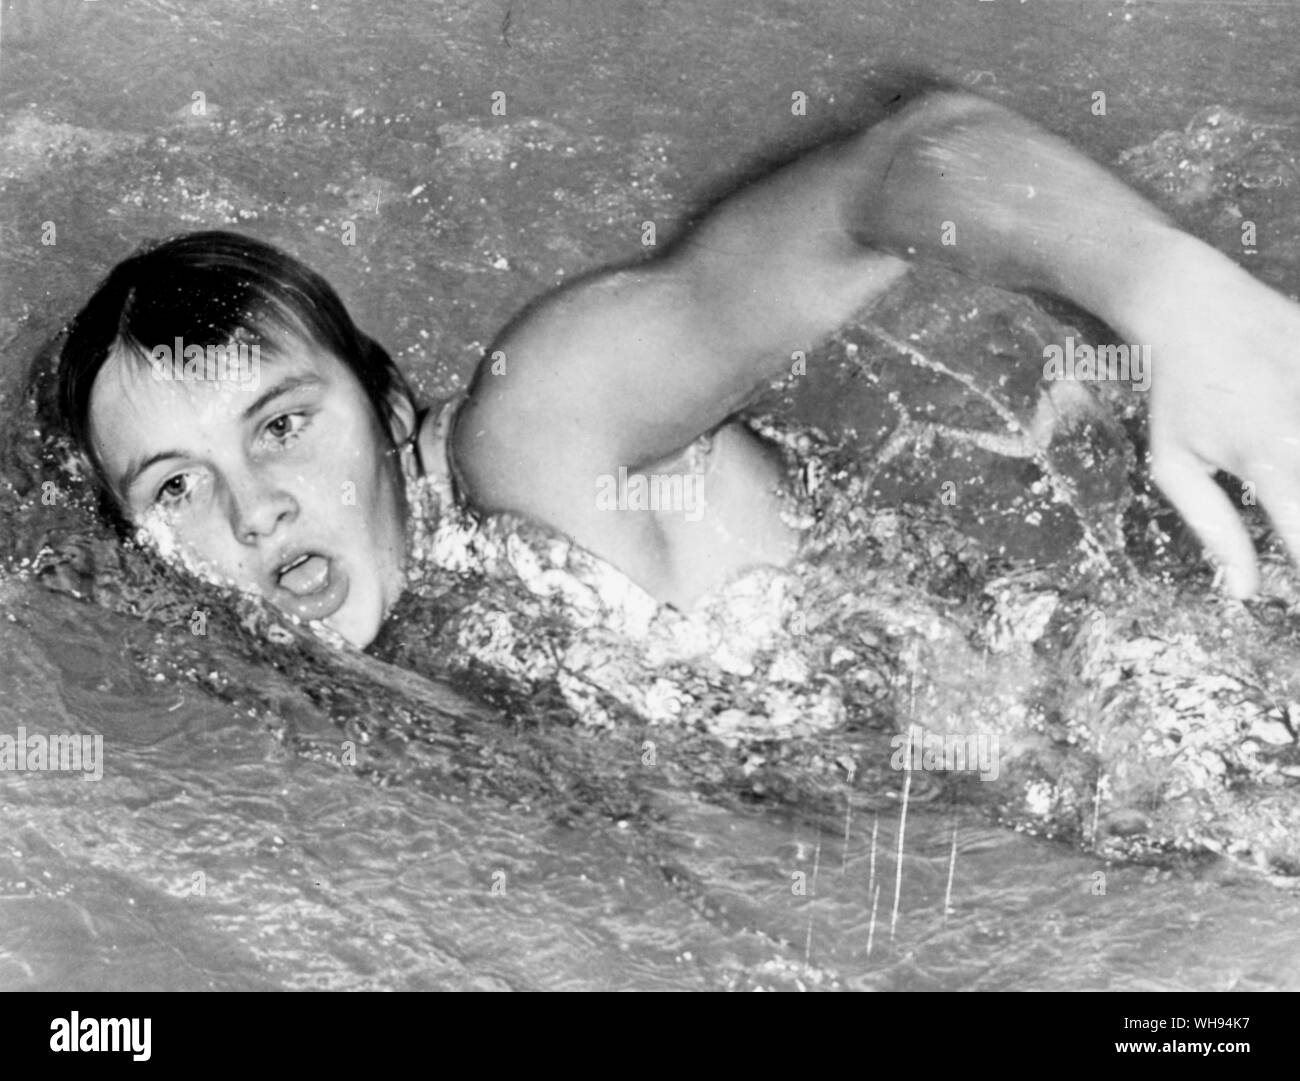 Germany. Munich Olympics 1972: Shane Gould (born 1956) of Australia. She won 3 gold medals, 1 silver and 1 bronze in the women's swimming events. Stock Photo